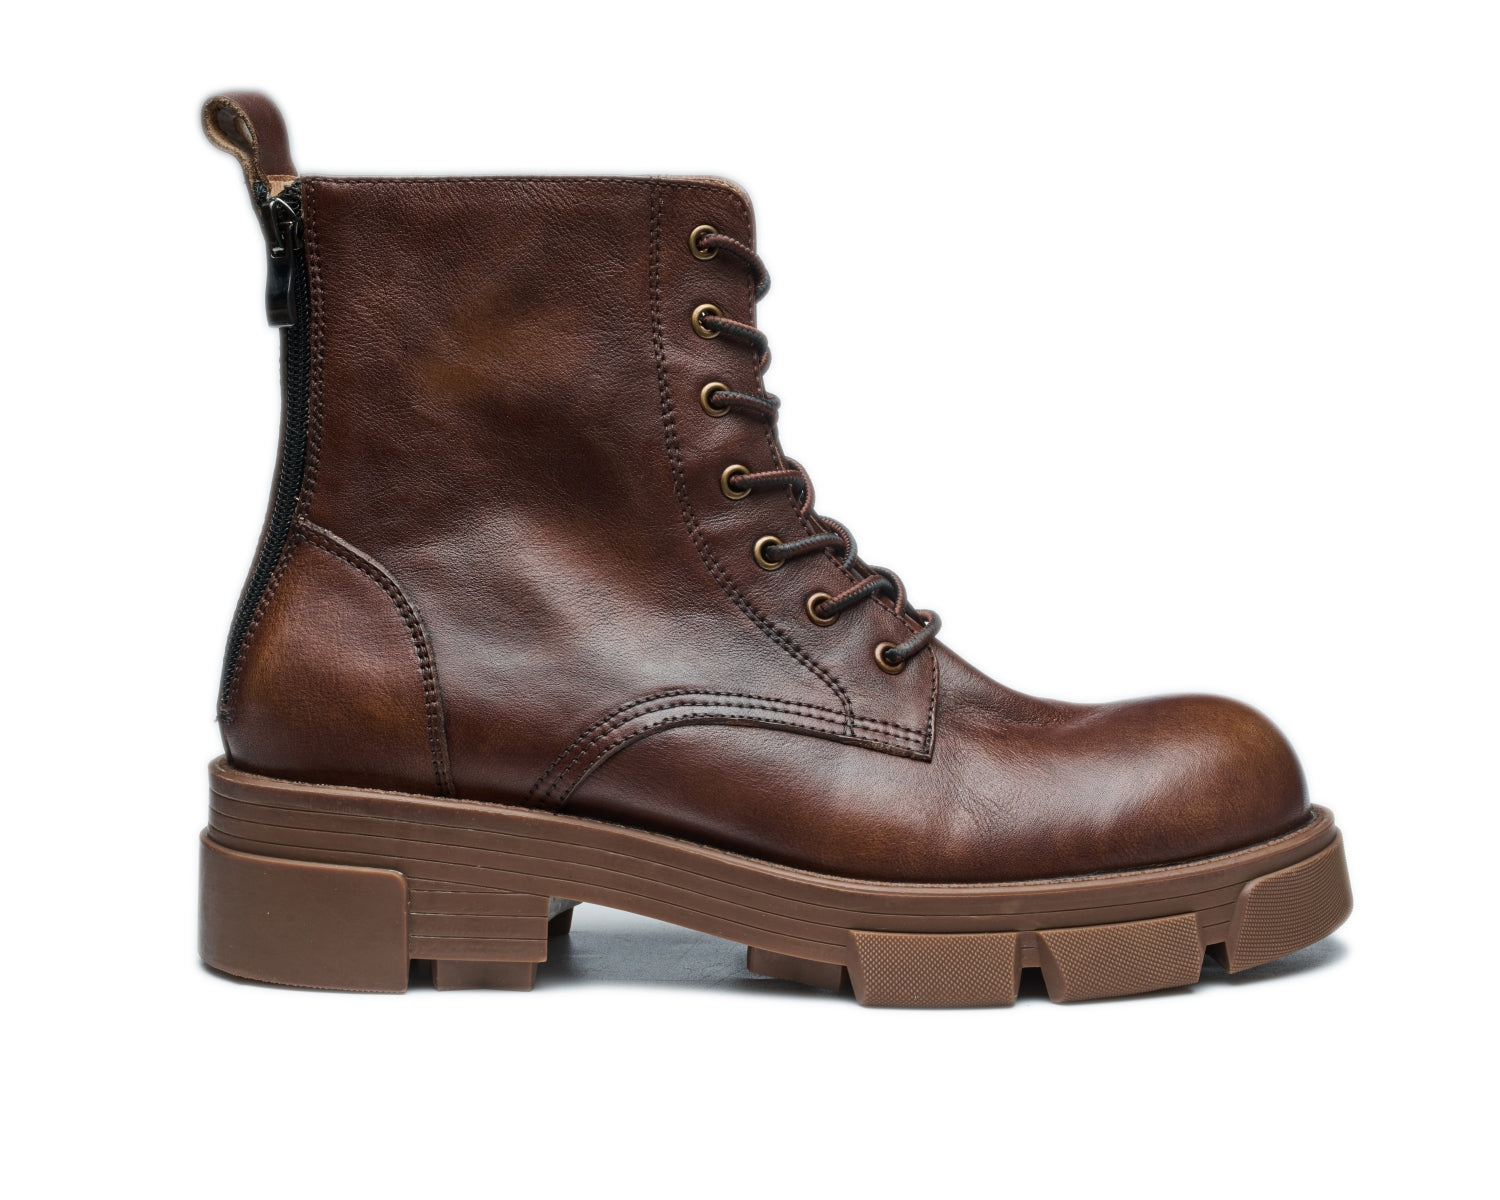 Men's lace-up work boots with lug sole in various styles including manner, old, and skin designs5